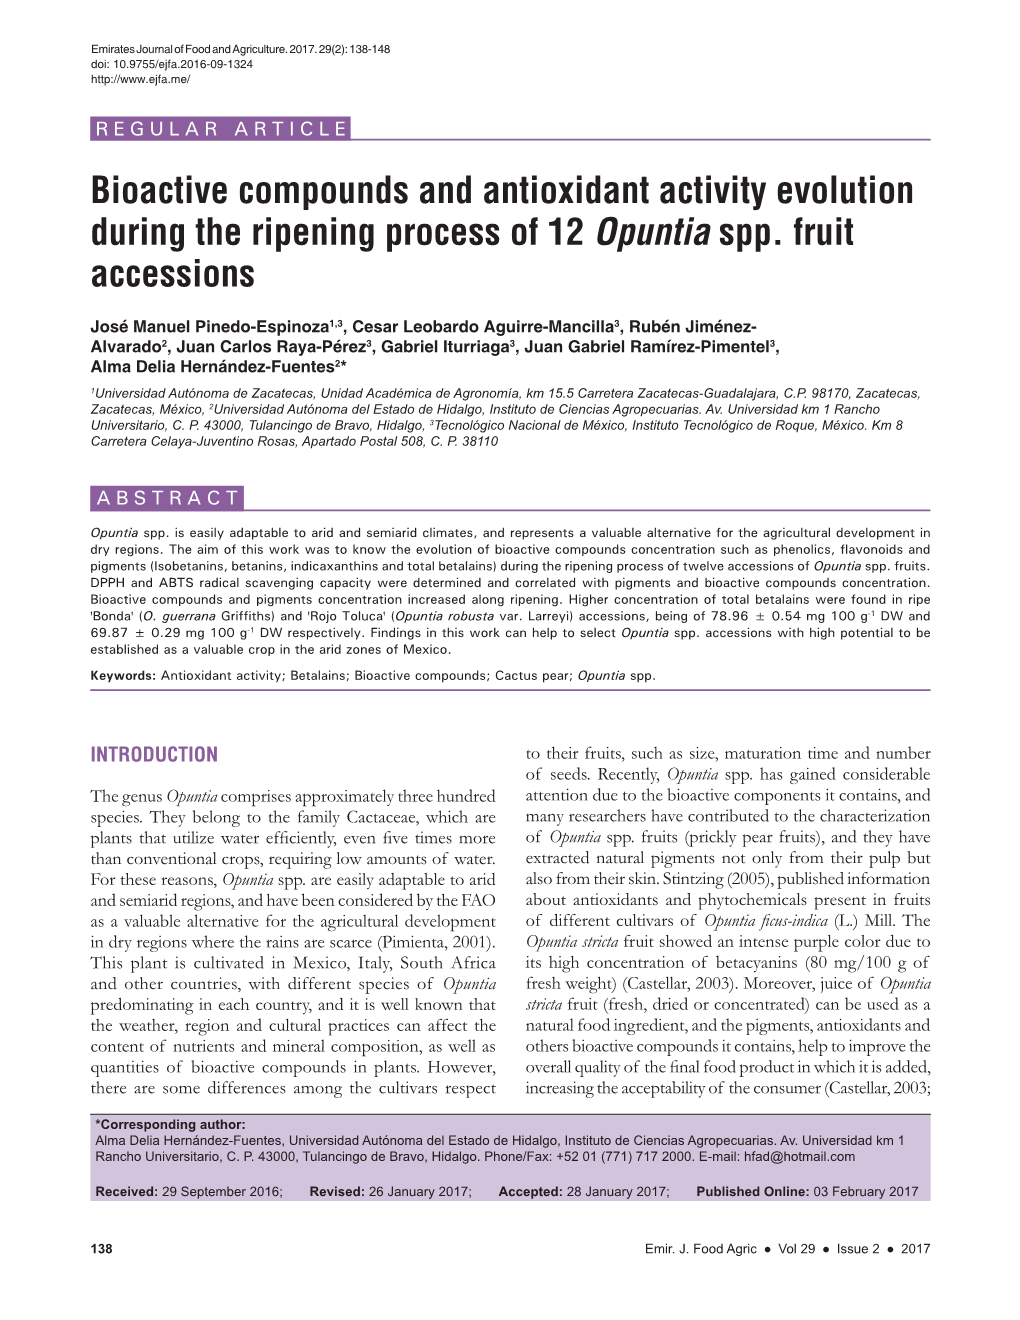 Bioactive Compounds and Antioxidant Activity Evolution During the Ripening Process of 12 Opuntia Spp